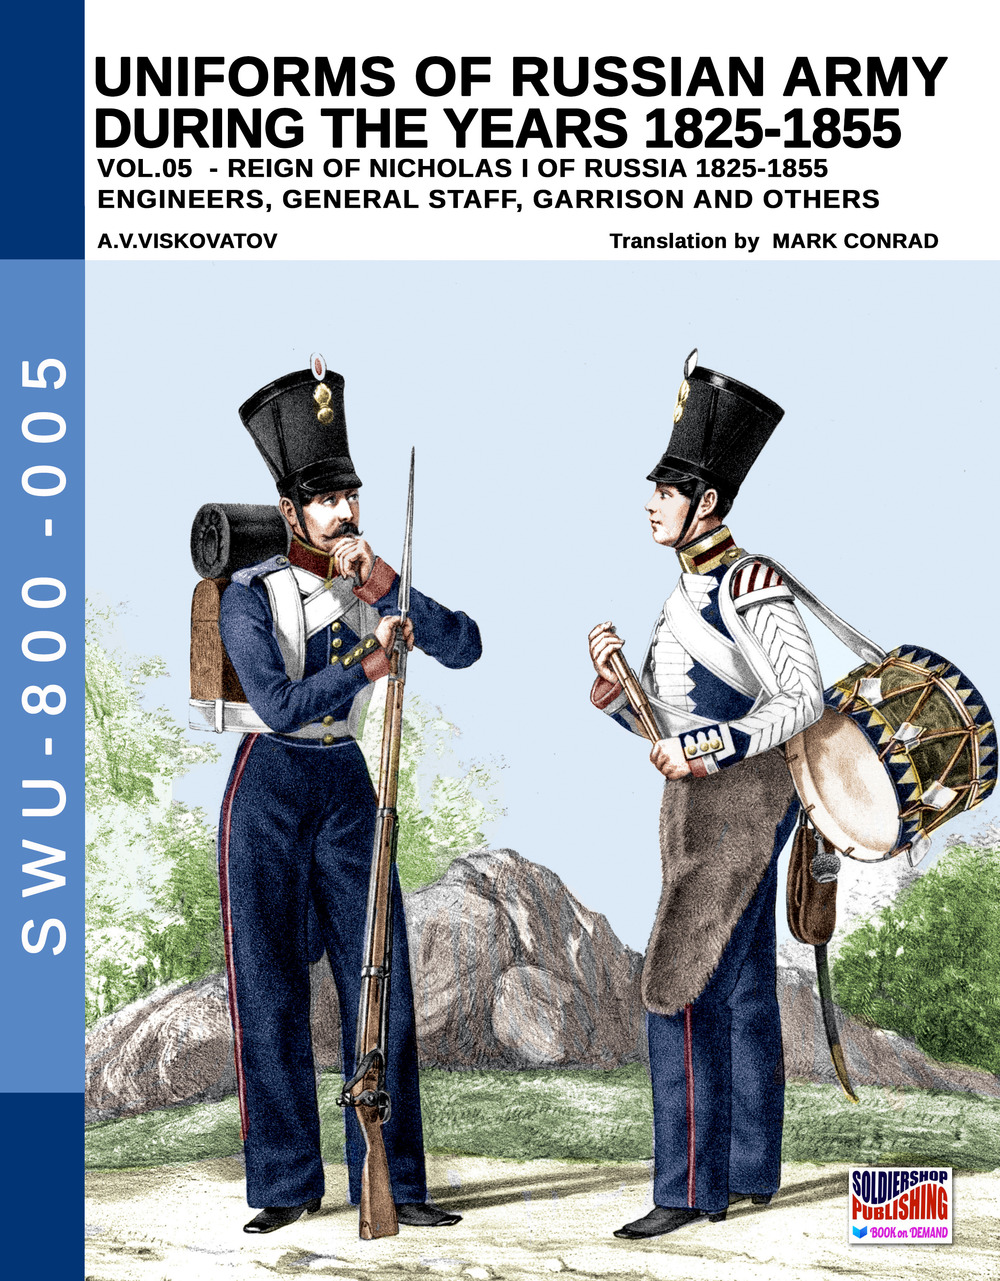 Uniforms of Russian army during the years 1825-1855. Ediz. illustrata. Vol. 5: Engineers, General staff, Garrison and others